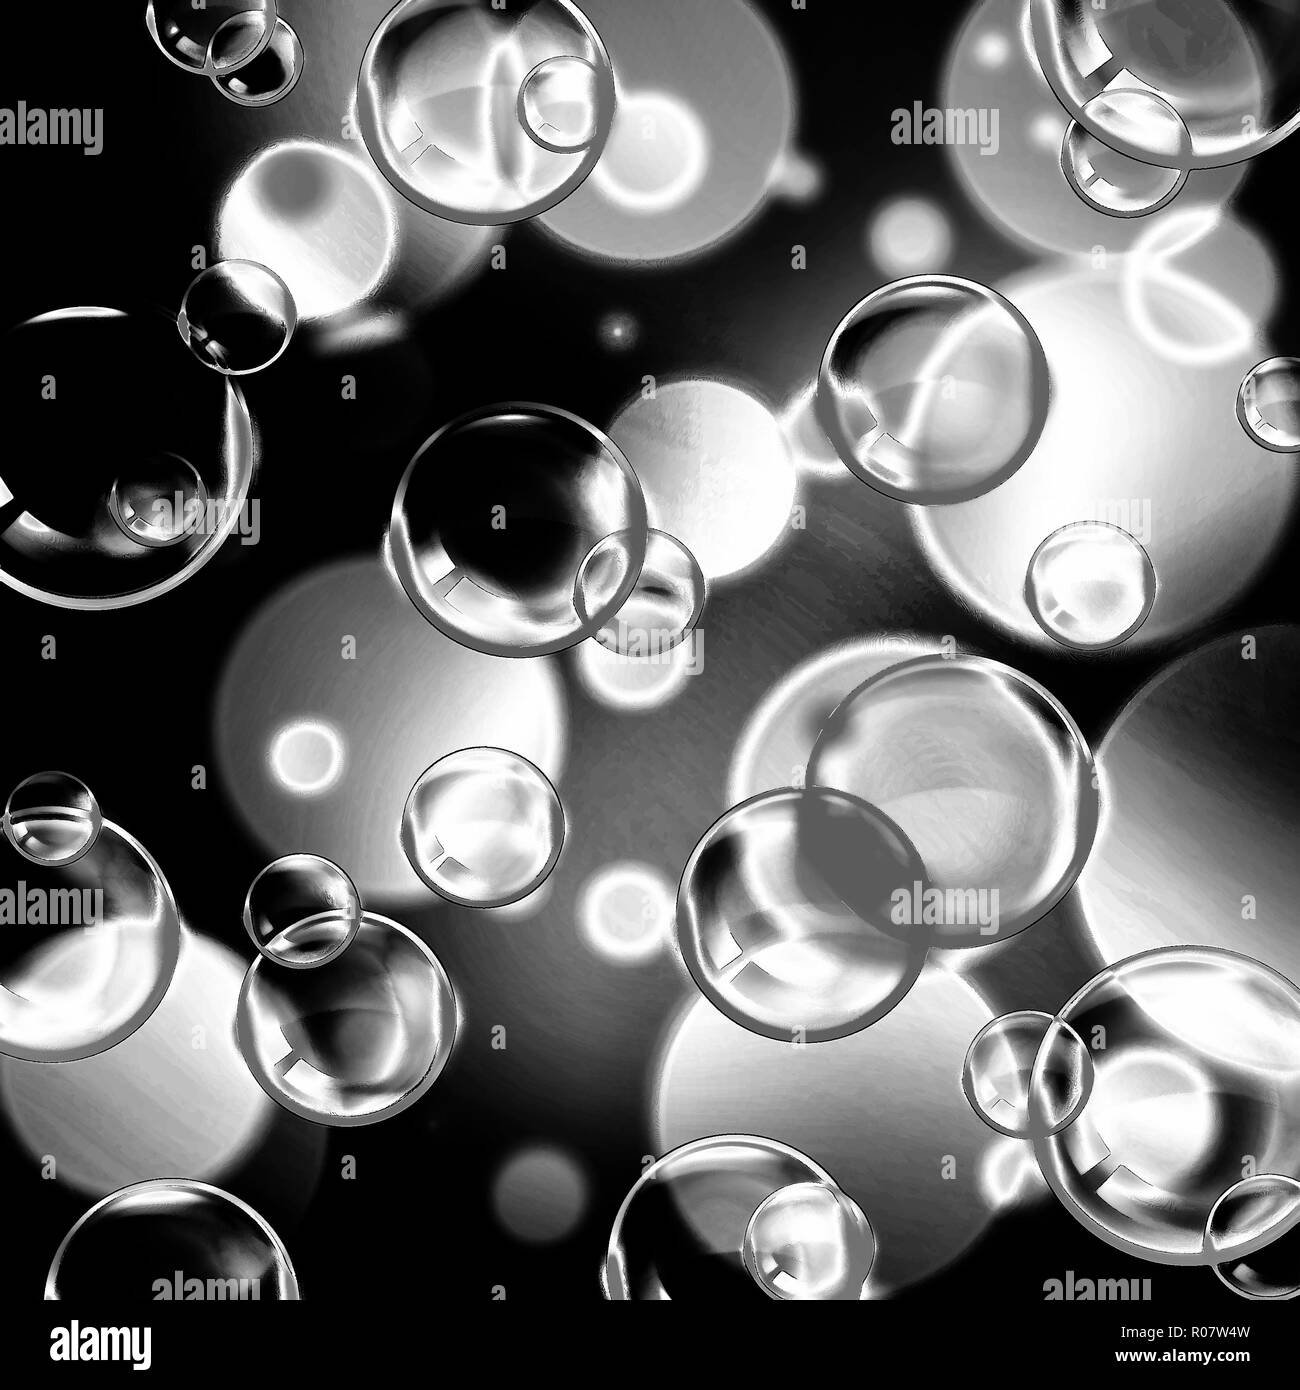 Abstract image of a beautiful rainbow bubble. Stock Photo